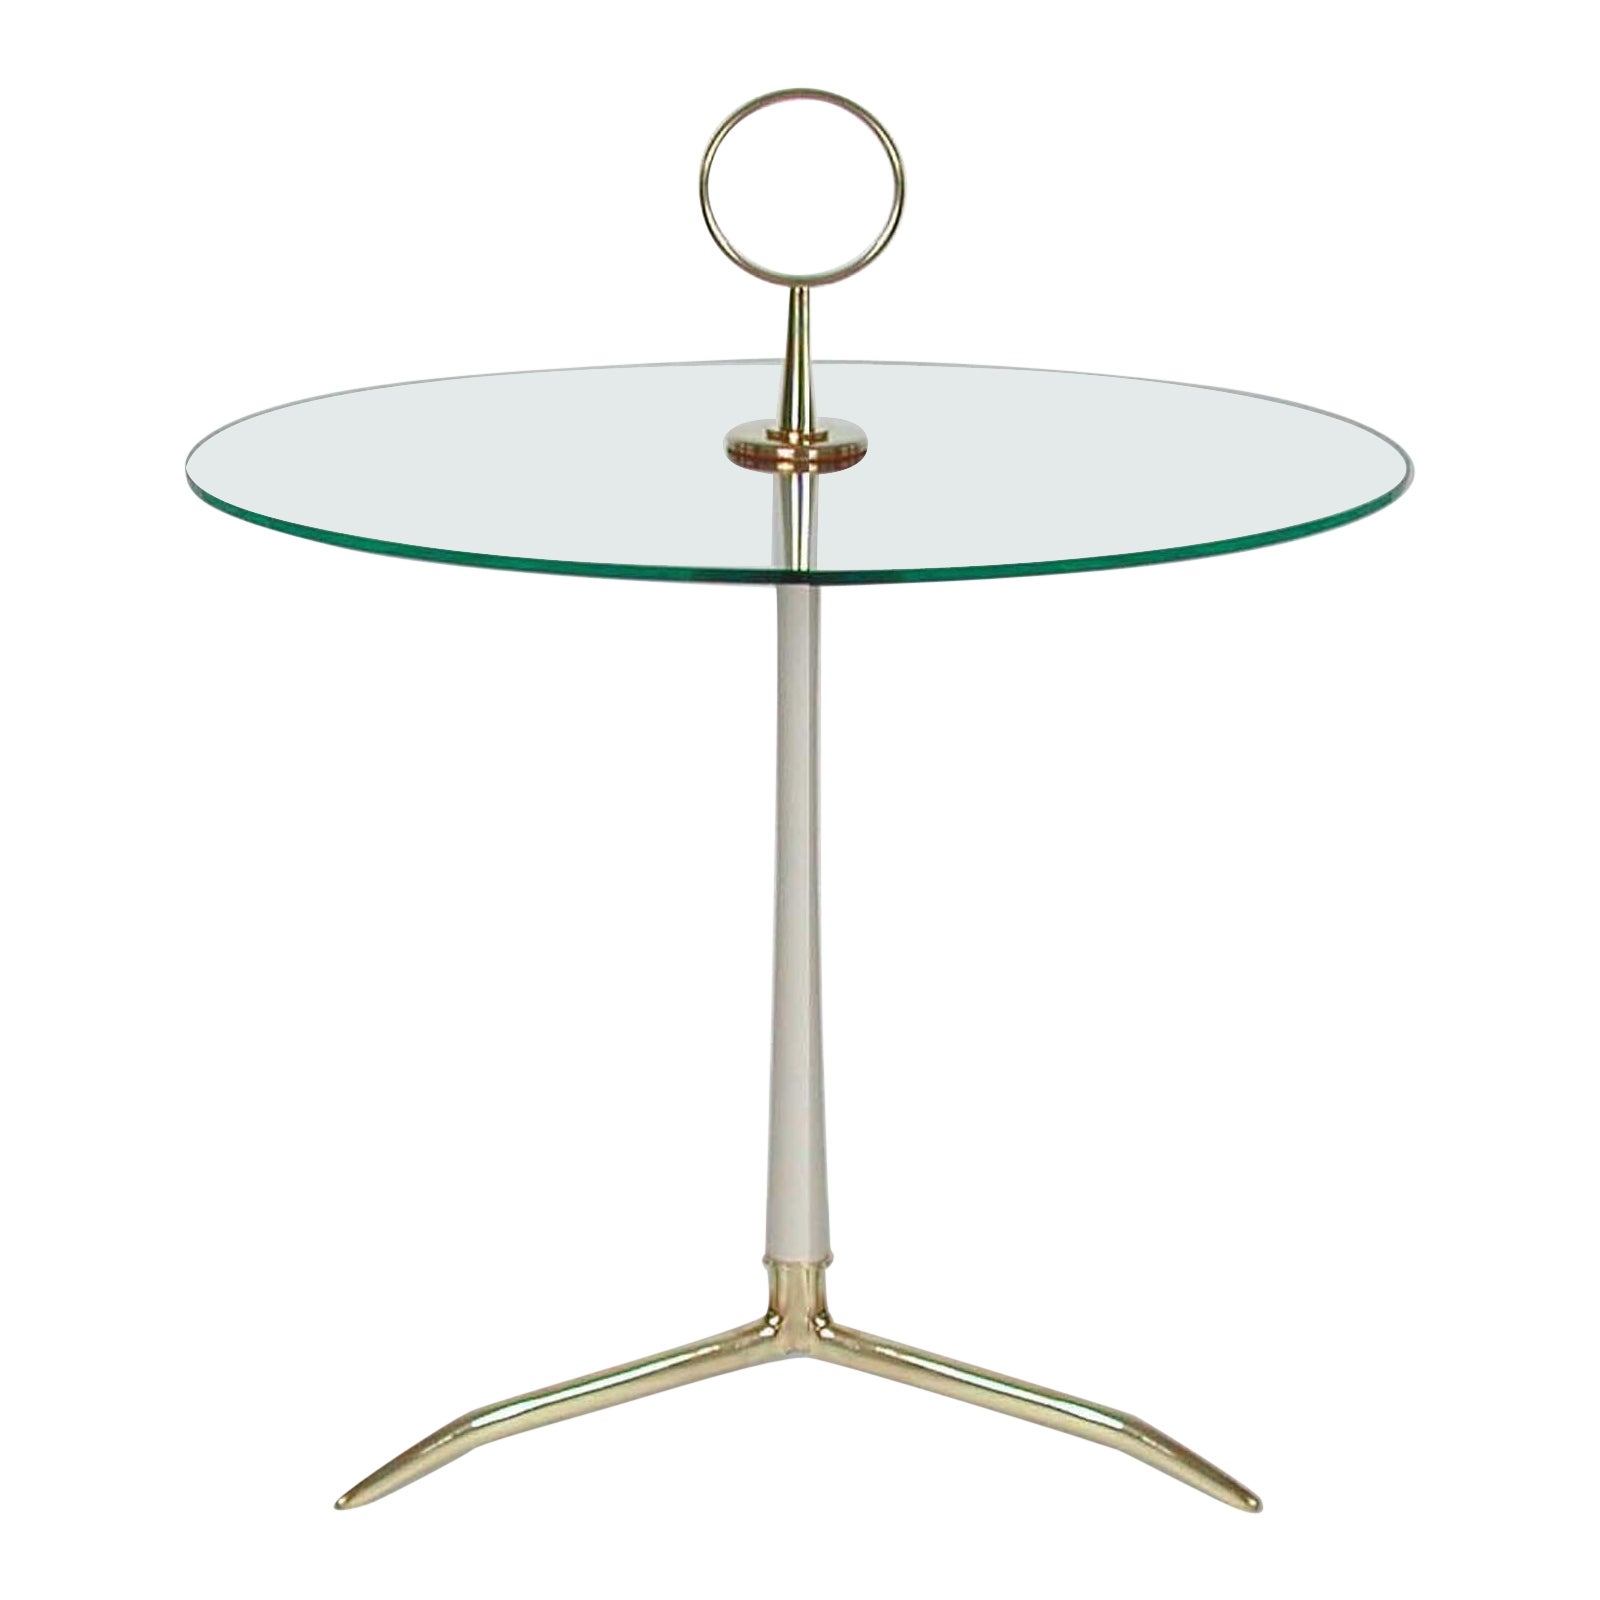 Cesare Lacca Midcentury Brass and Clear Glass Tripod Side Table, Italy, 1950s